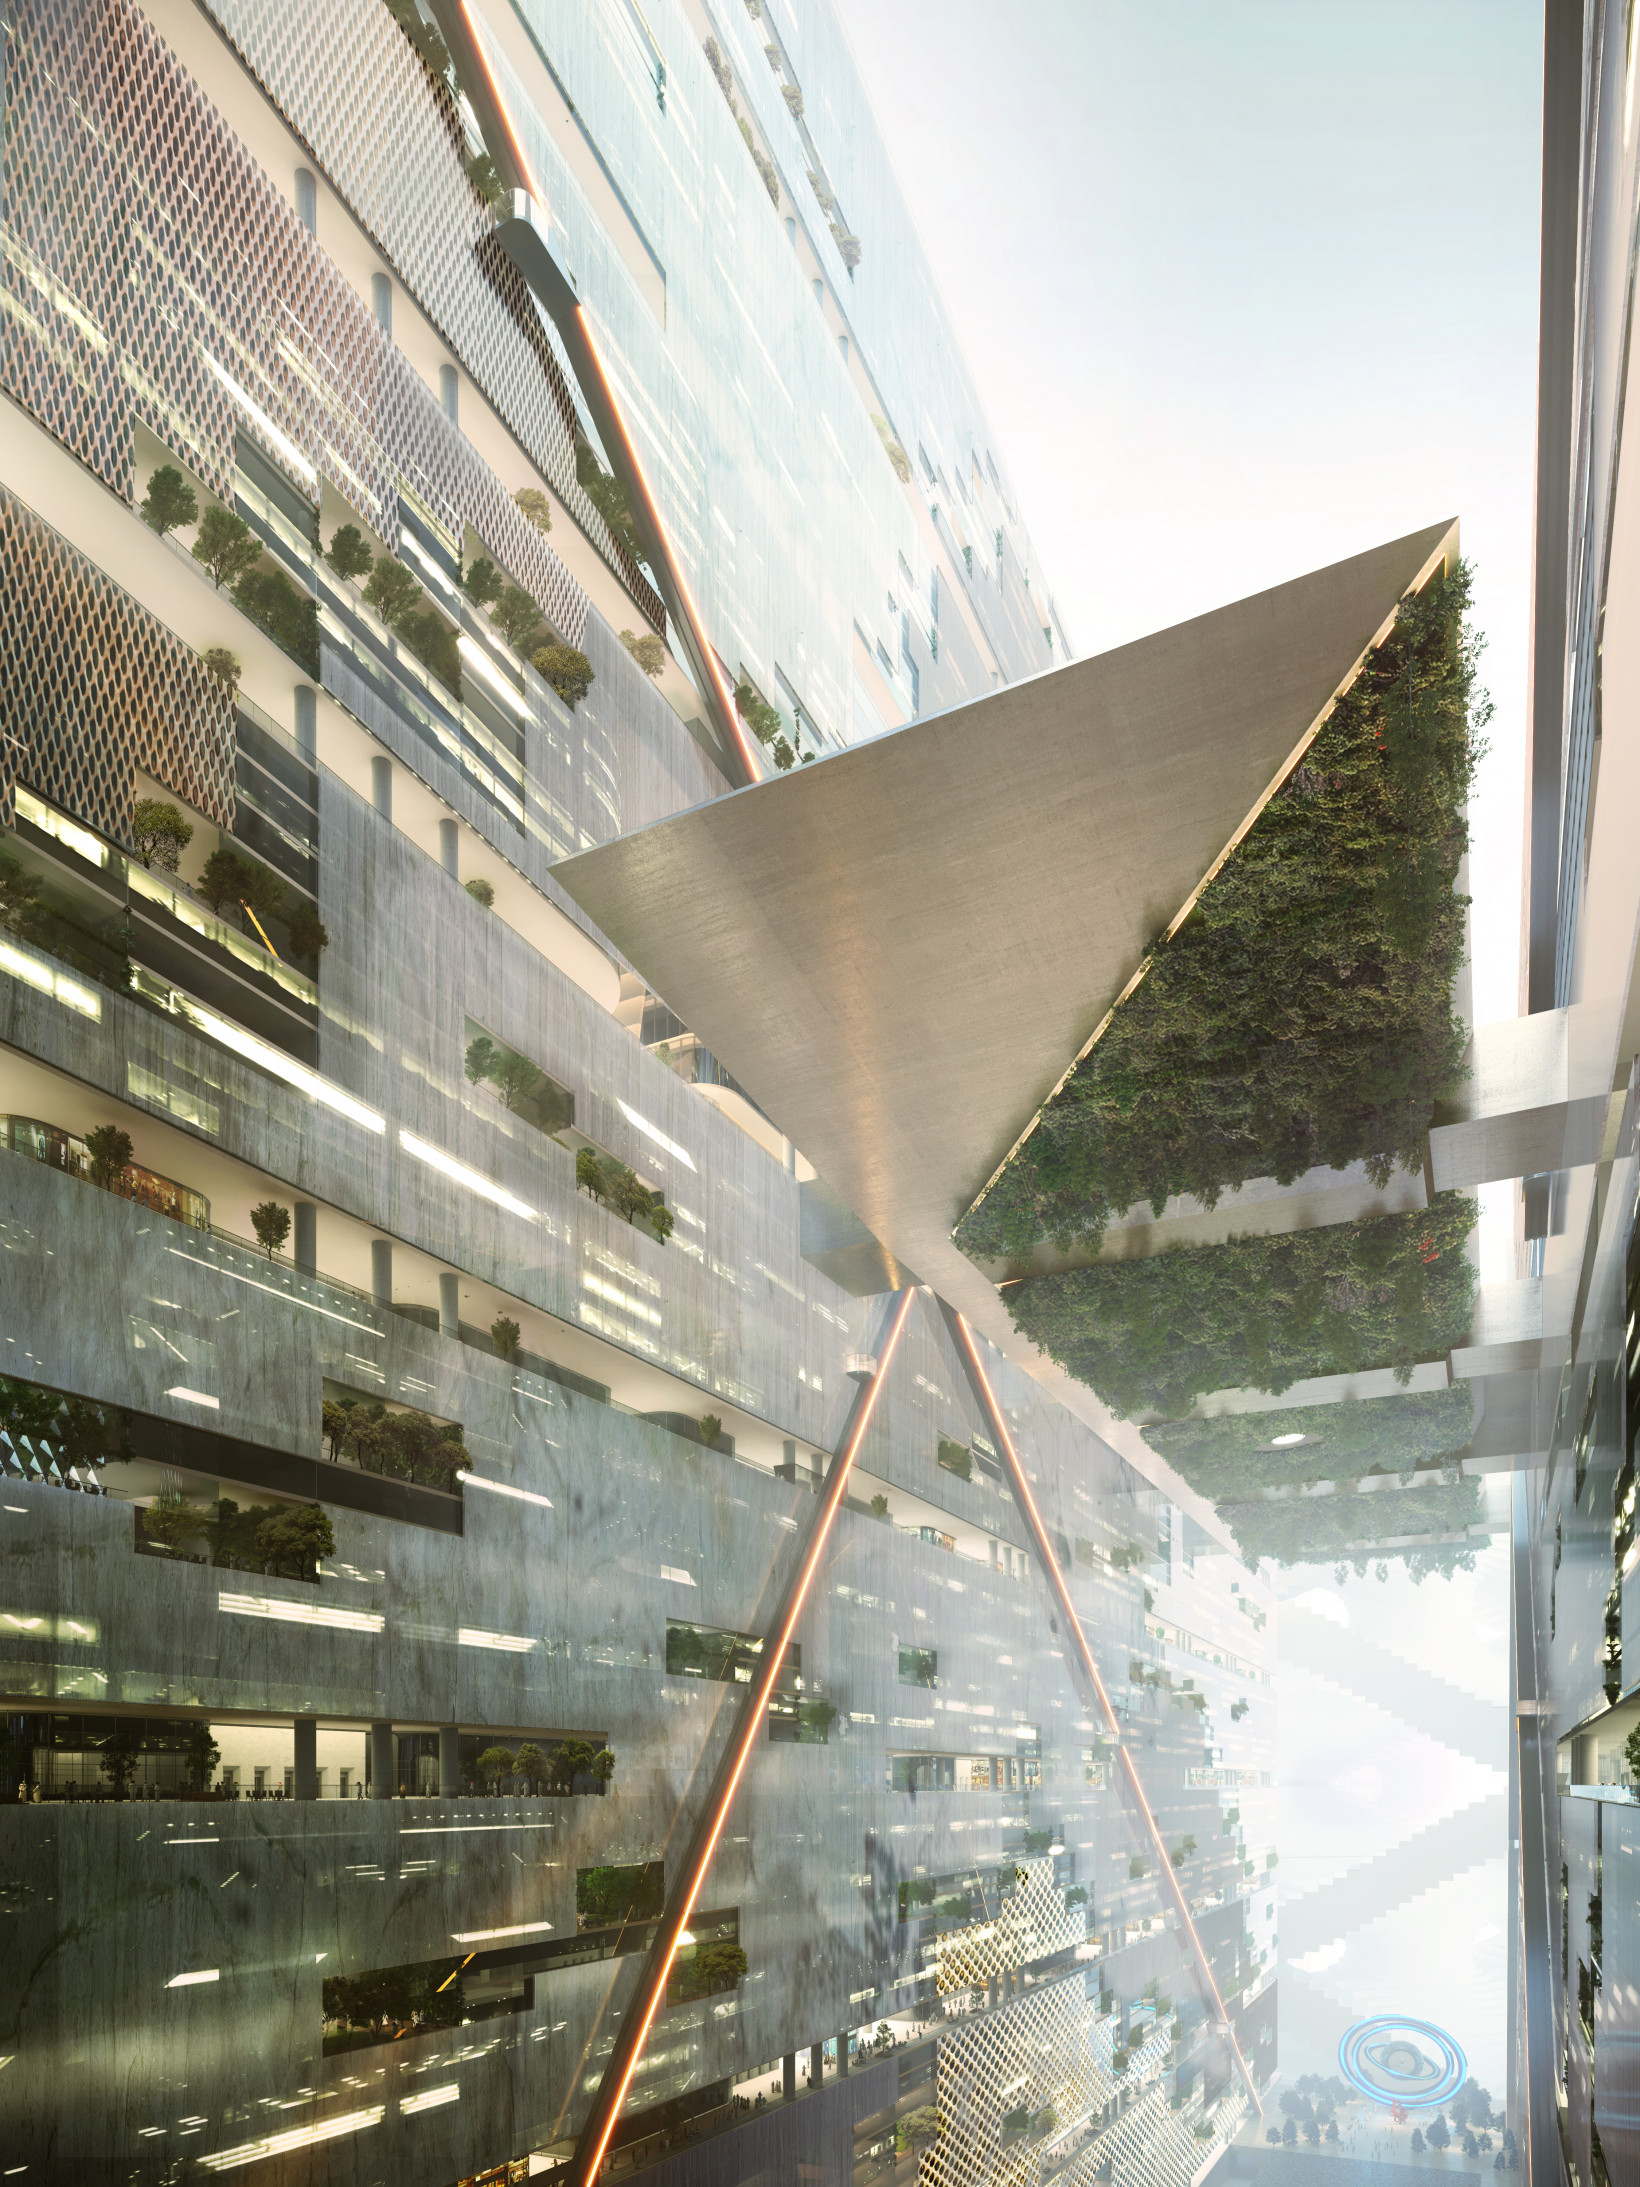 The outer mirror facade is designed to blend with nature.